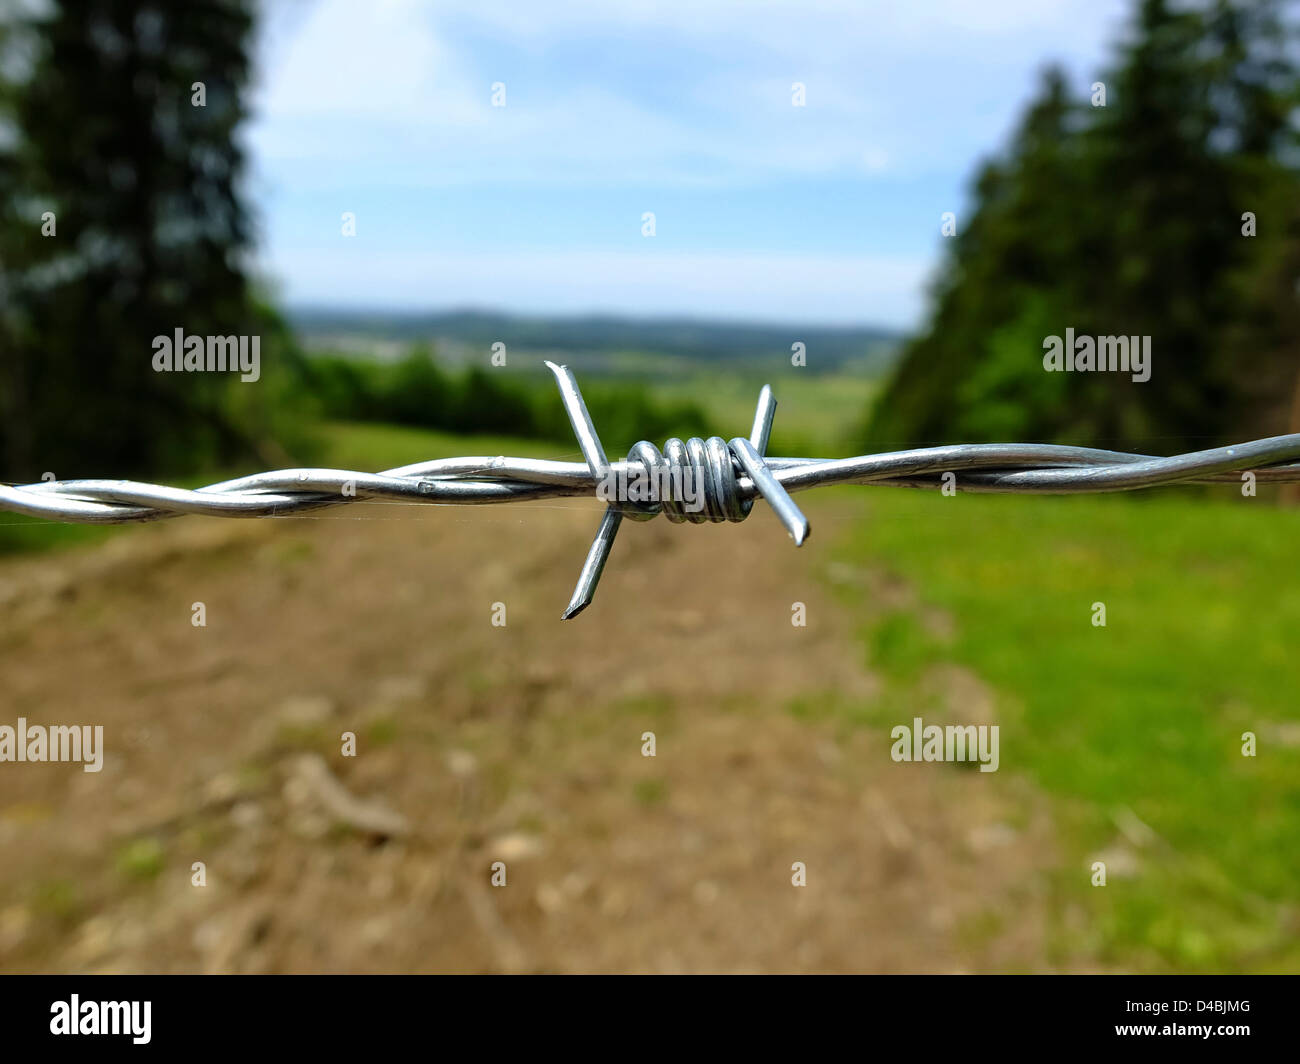 barbed wire close-up Stock Photo